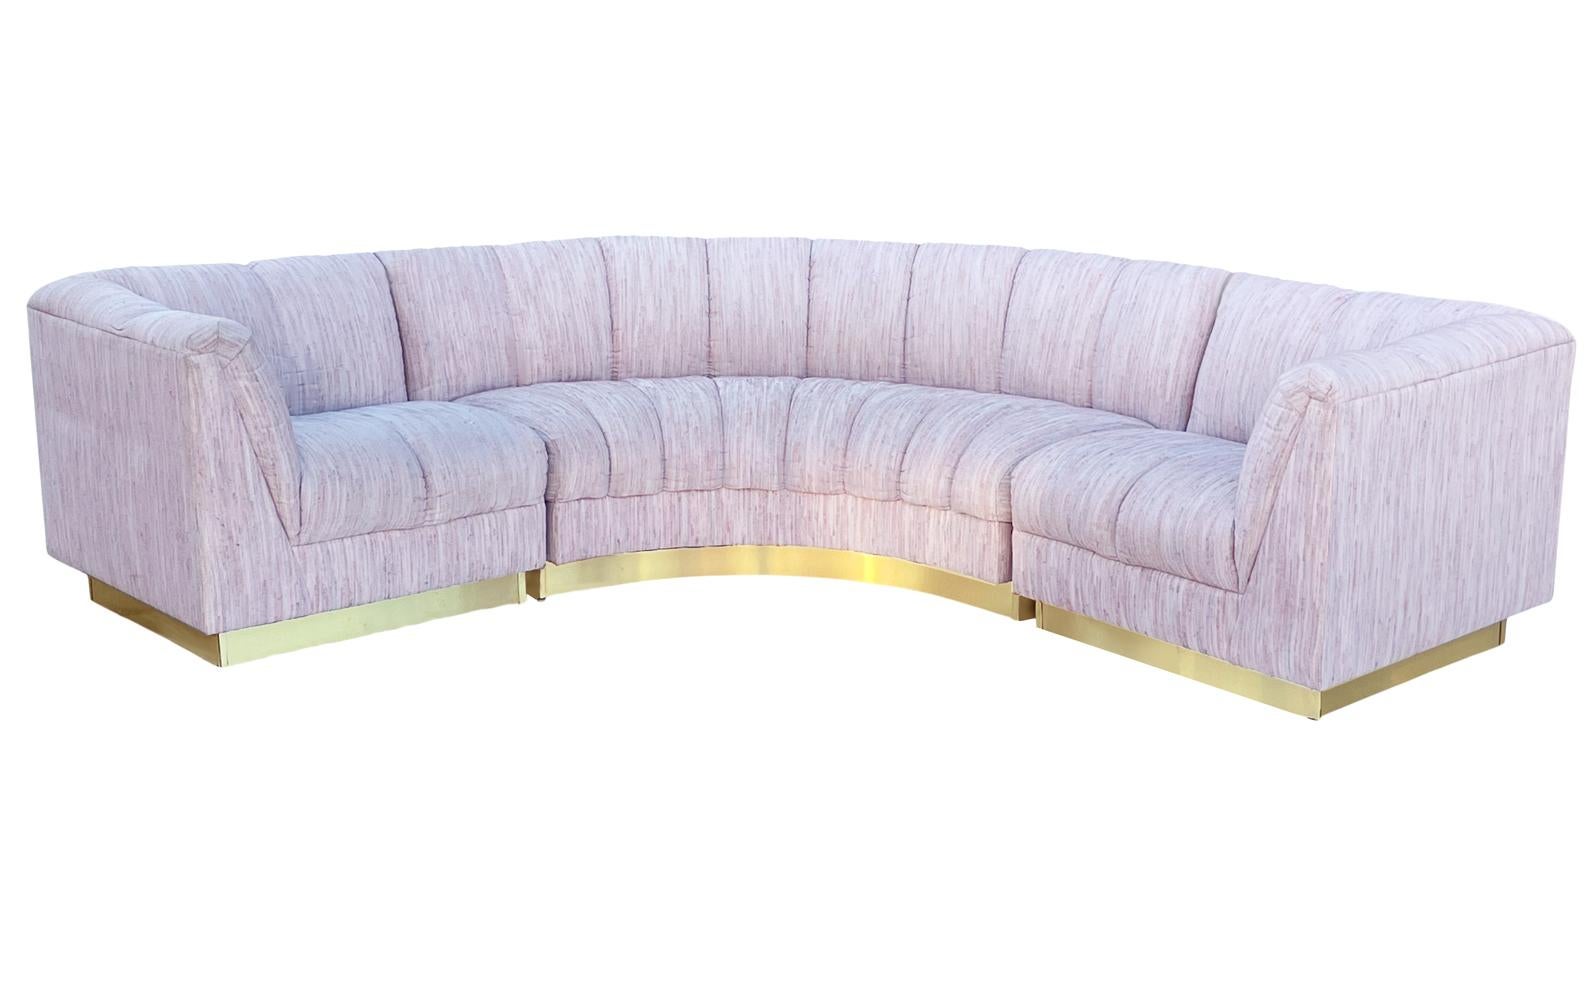 A post modern curved sectional circa 1980's. It features a 3 piece design with brass plinth base. Fabric is original and needs updating. Overall depth is 34 inches.